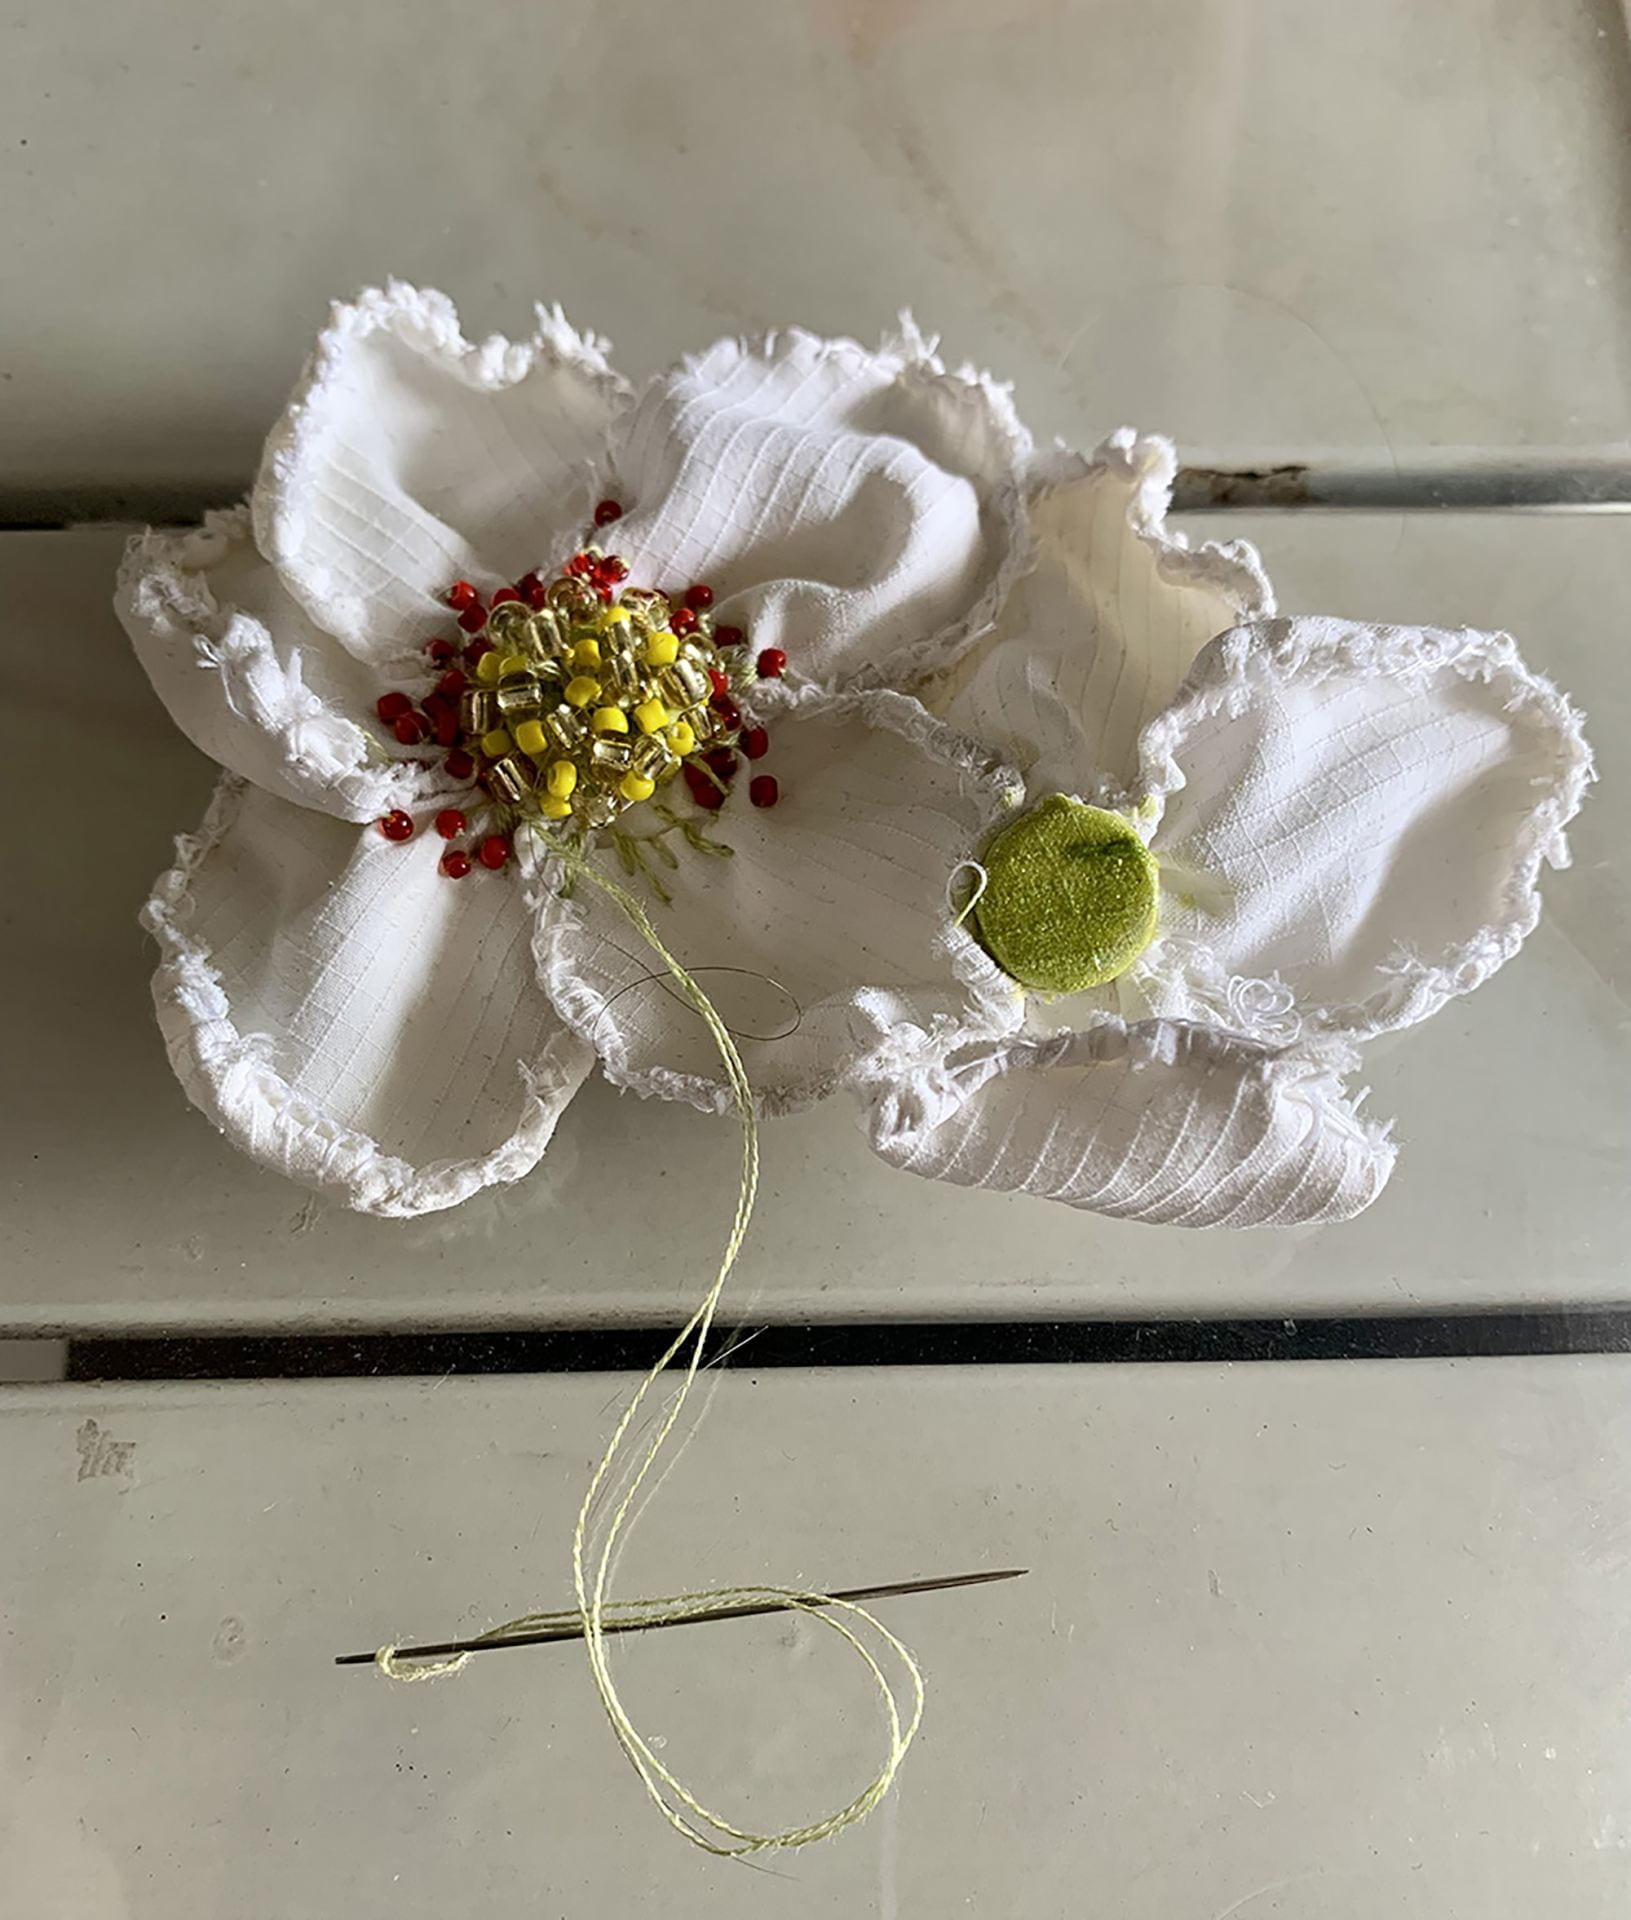 Textile flowers under construction with a hand-sewing needle and thread, embellished with beads and resting on a white slatted table top.